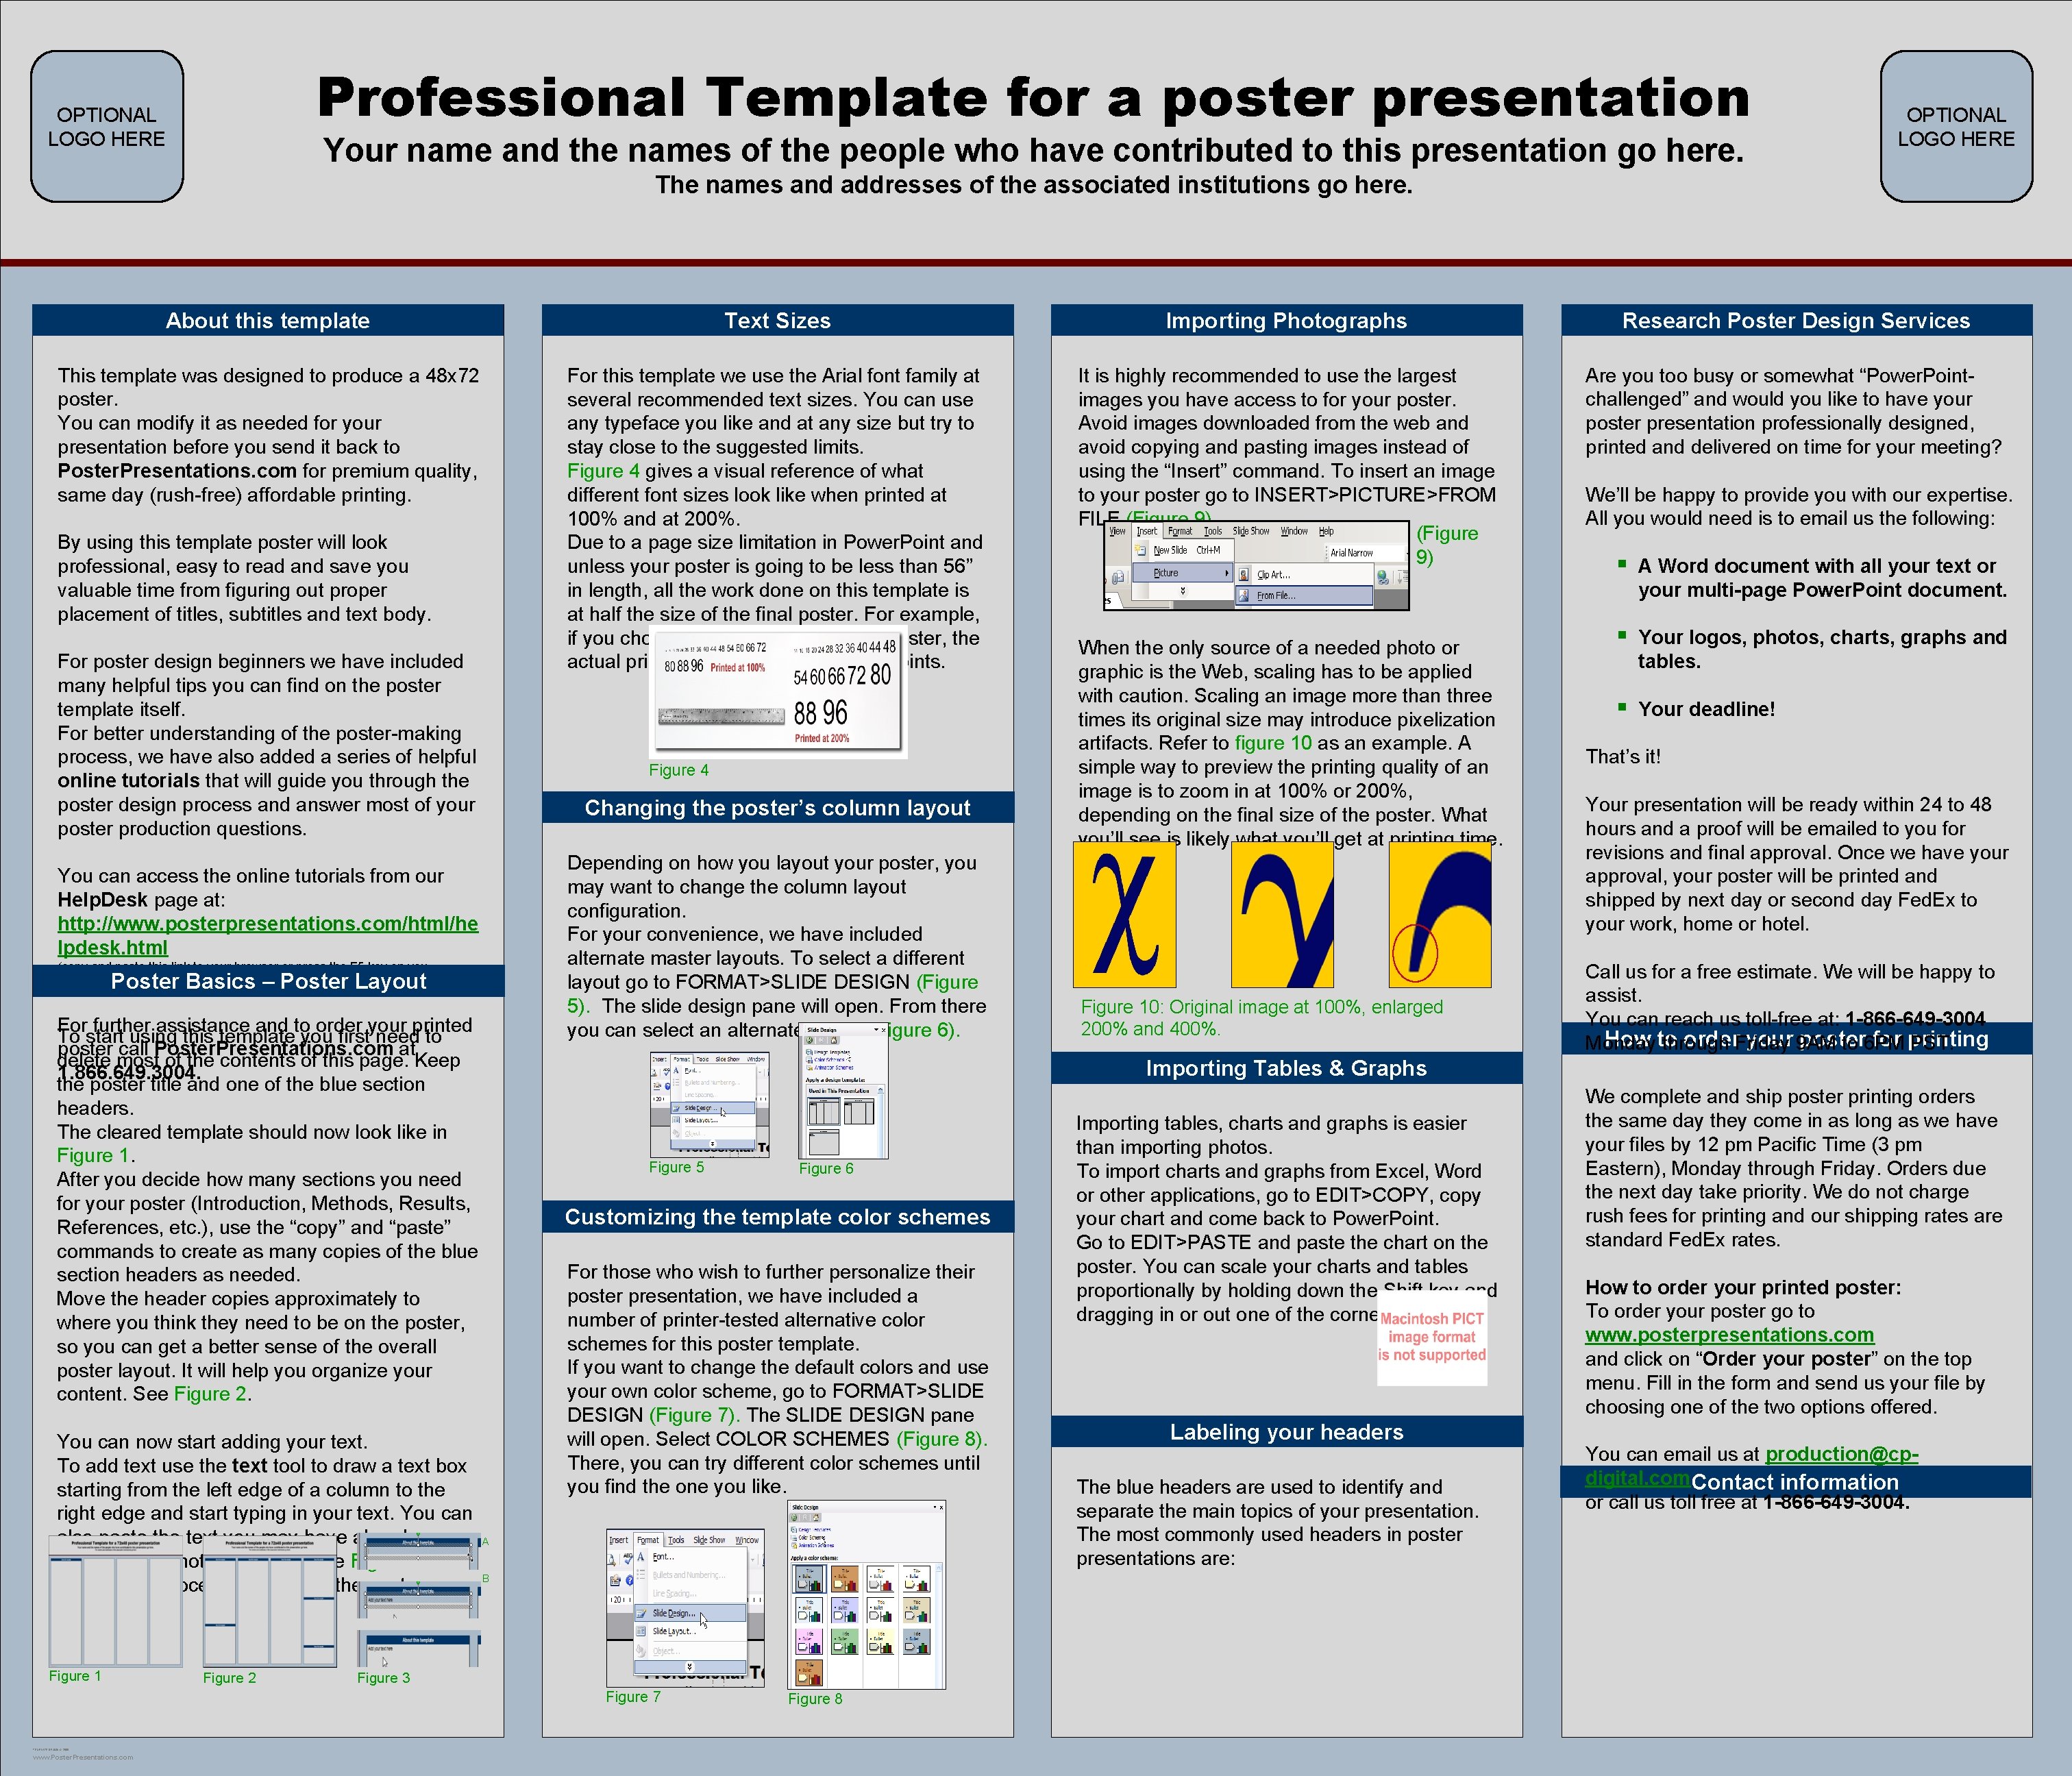 Professional Template for a poster presentation OPTIONAL LOGO HERE Your name and the names